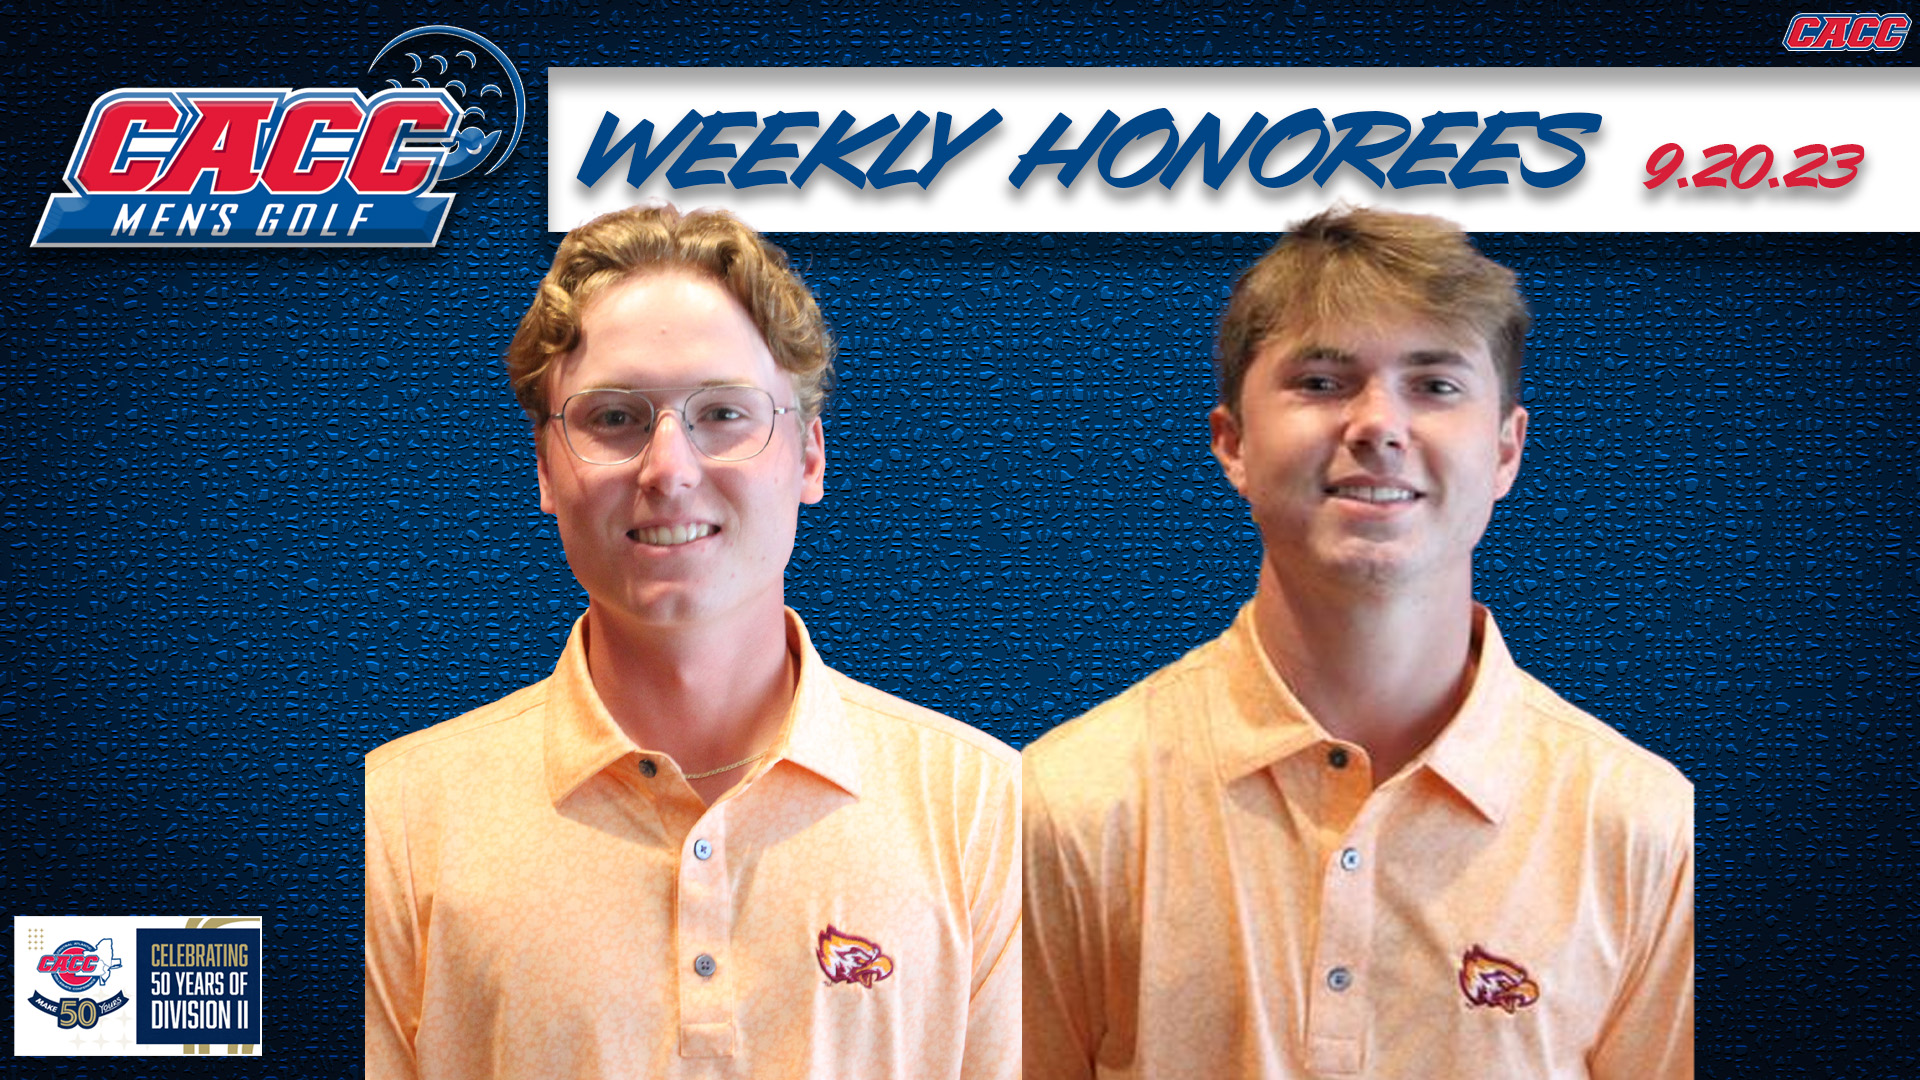 CACC Men's Golf Weekly Honorees (9-20-23)